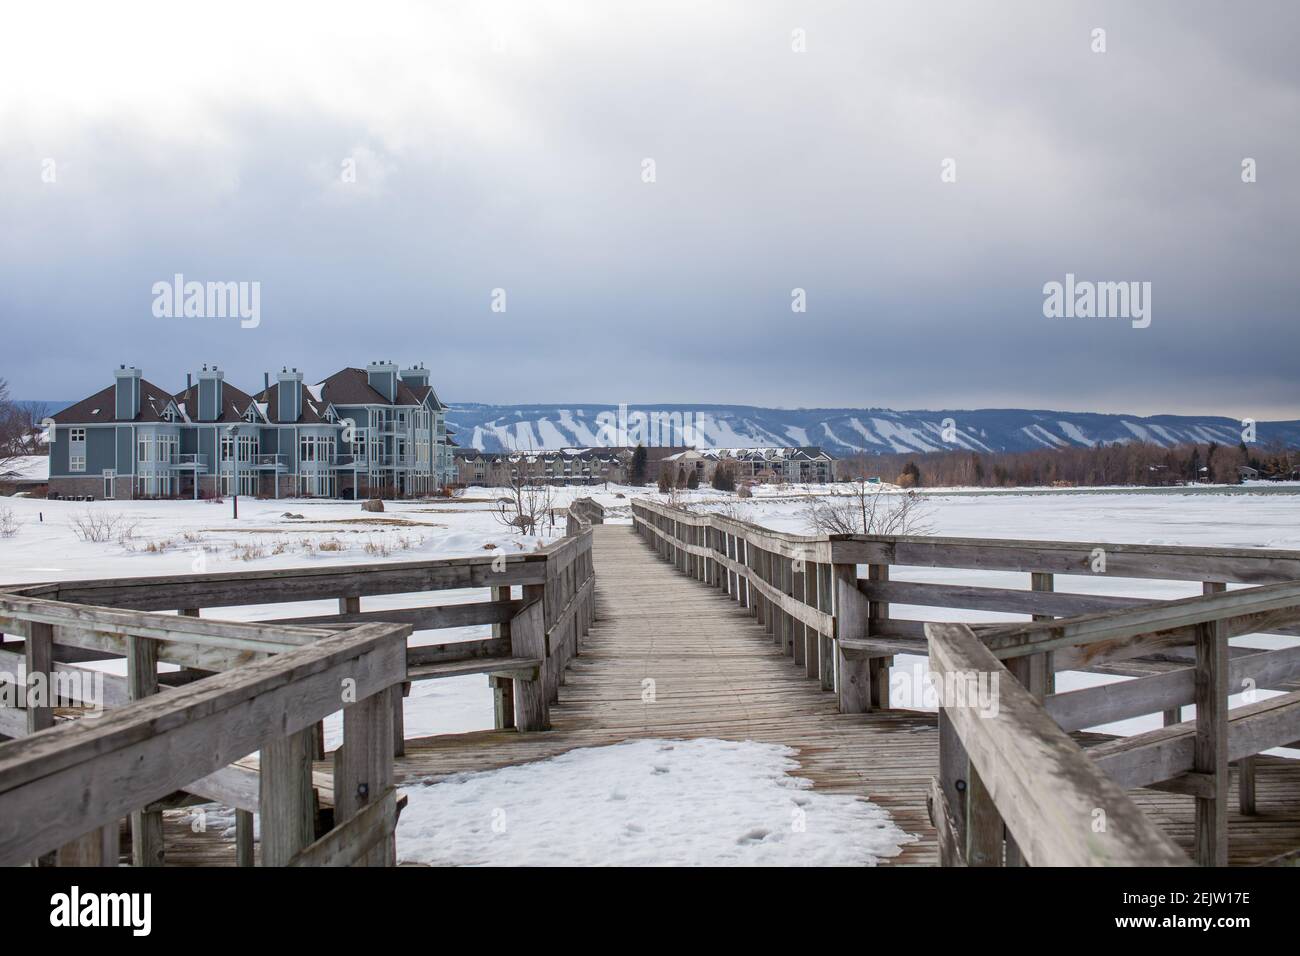 A wooden bridge in Lighthouse Point, Collingwood, crosses a portion of Georgian Bay while overlooking the Blue Mountain Ski hills from a distance, wit Stock Photo